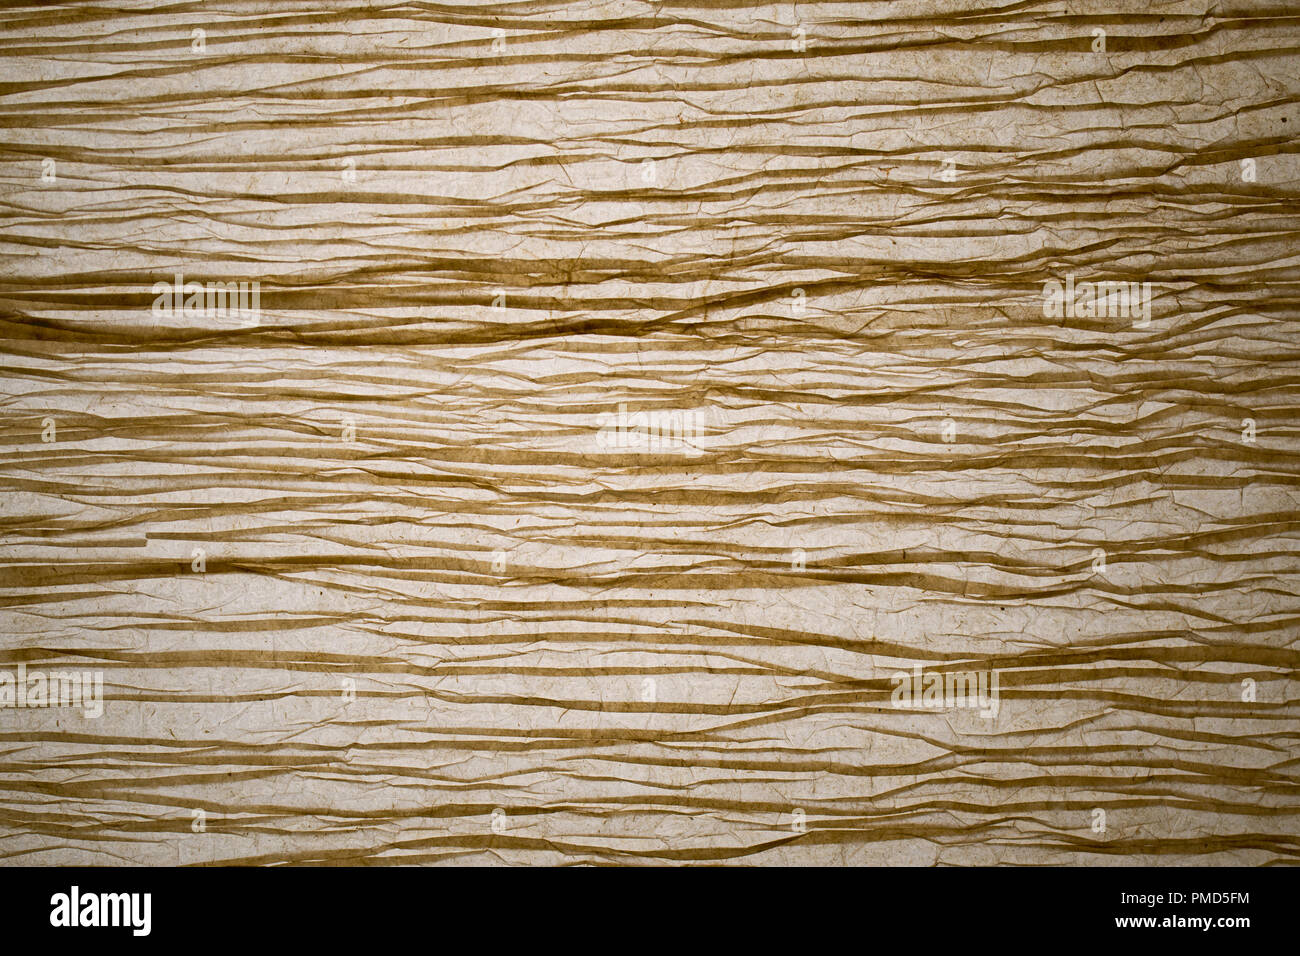 Close-up studio image of backlit handmade banana paper showing details and textures, backdrop Stock Photo